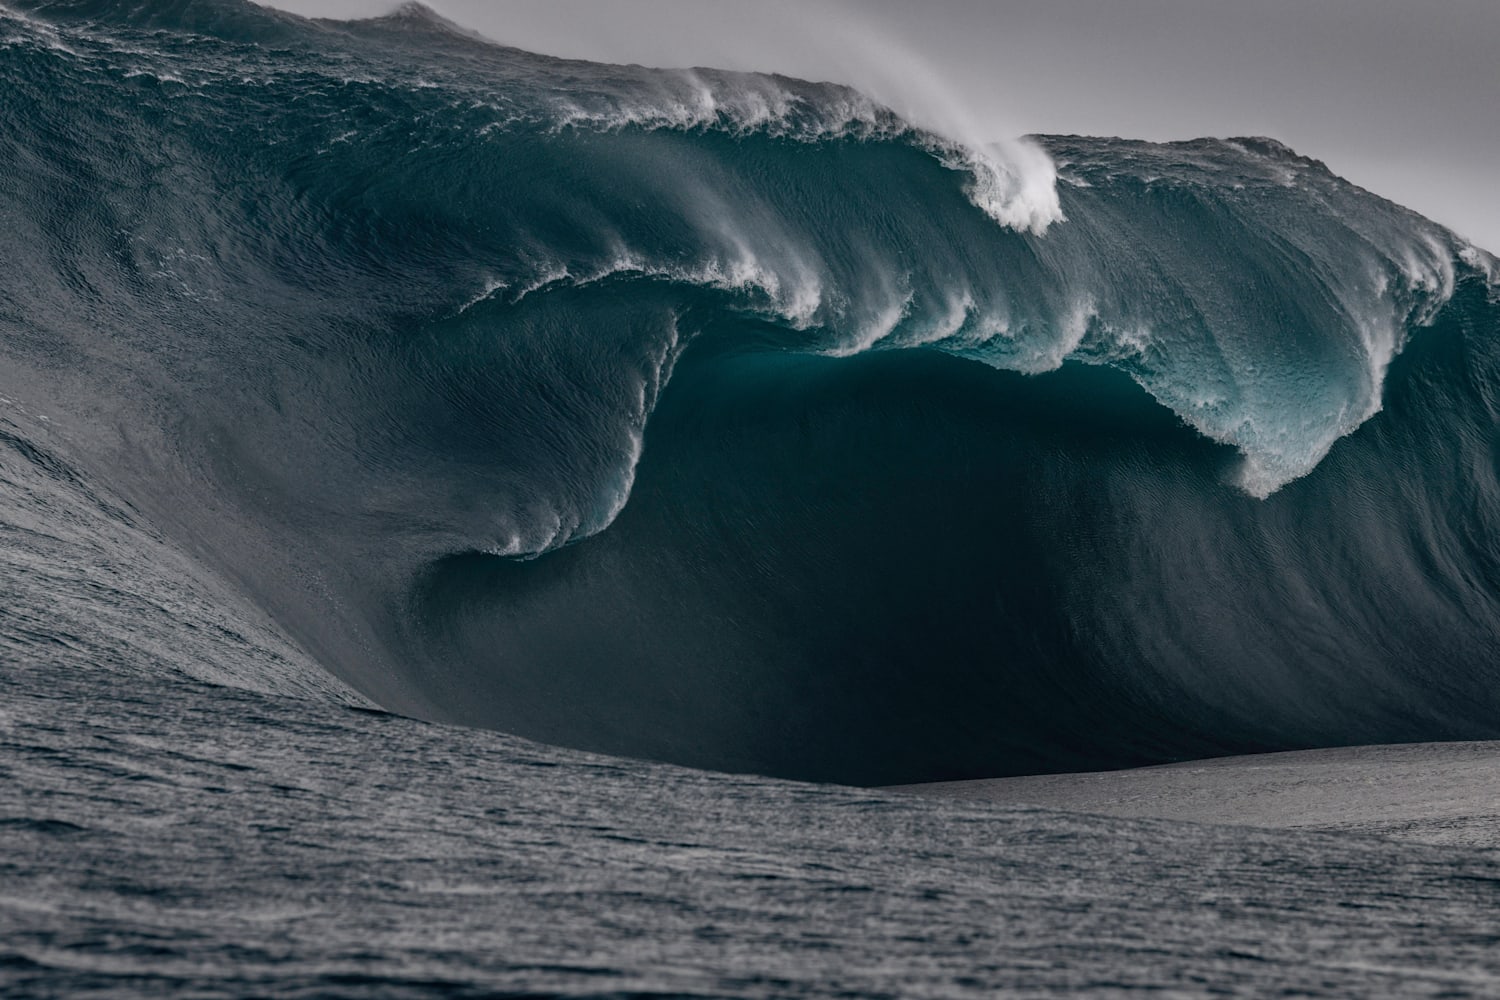 The Right, Australia: The biggest wave ever captured?